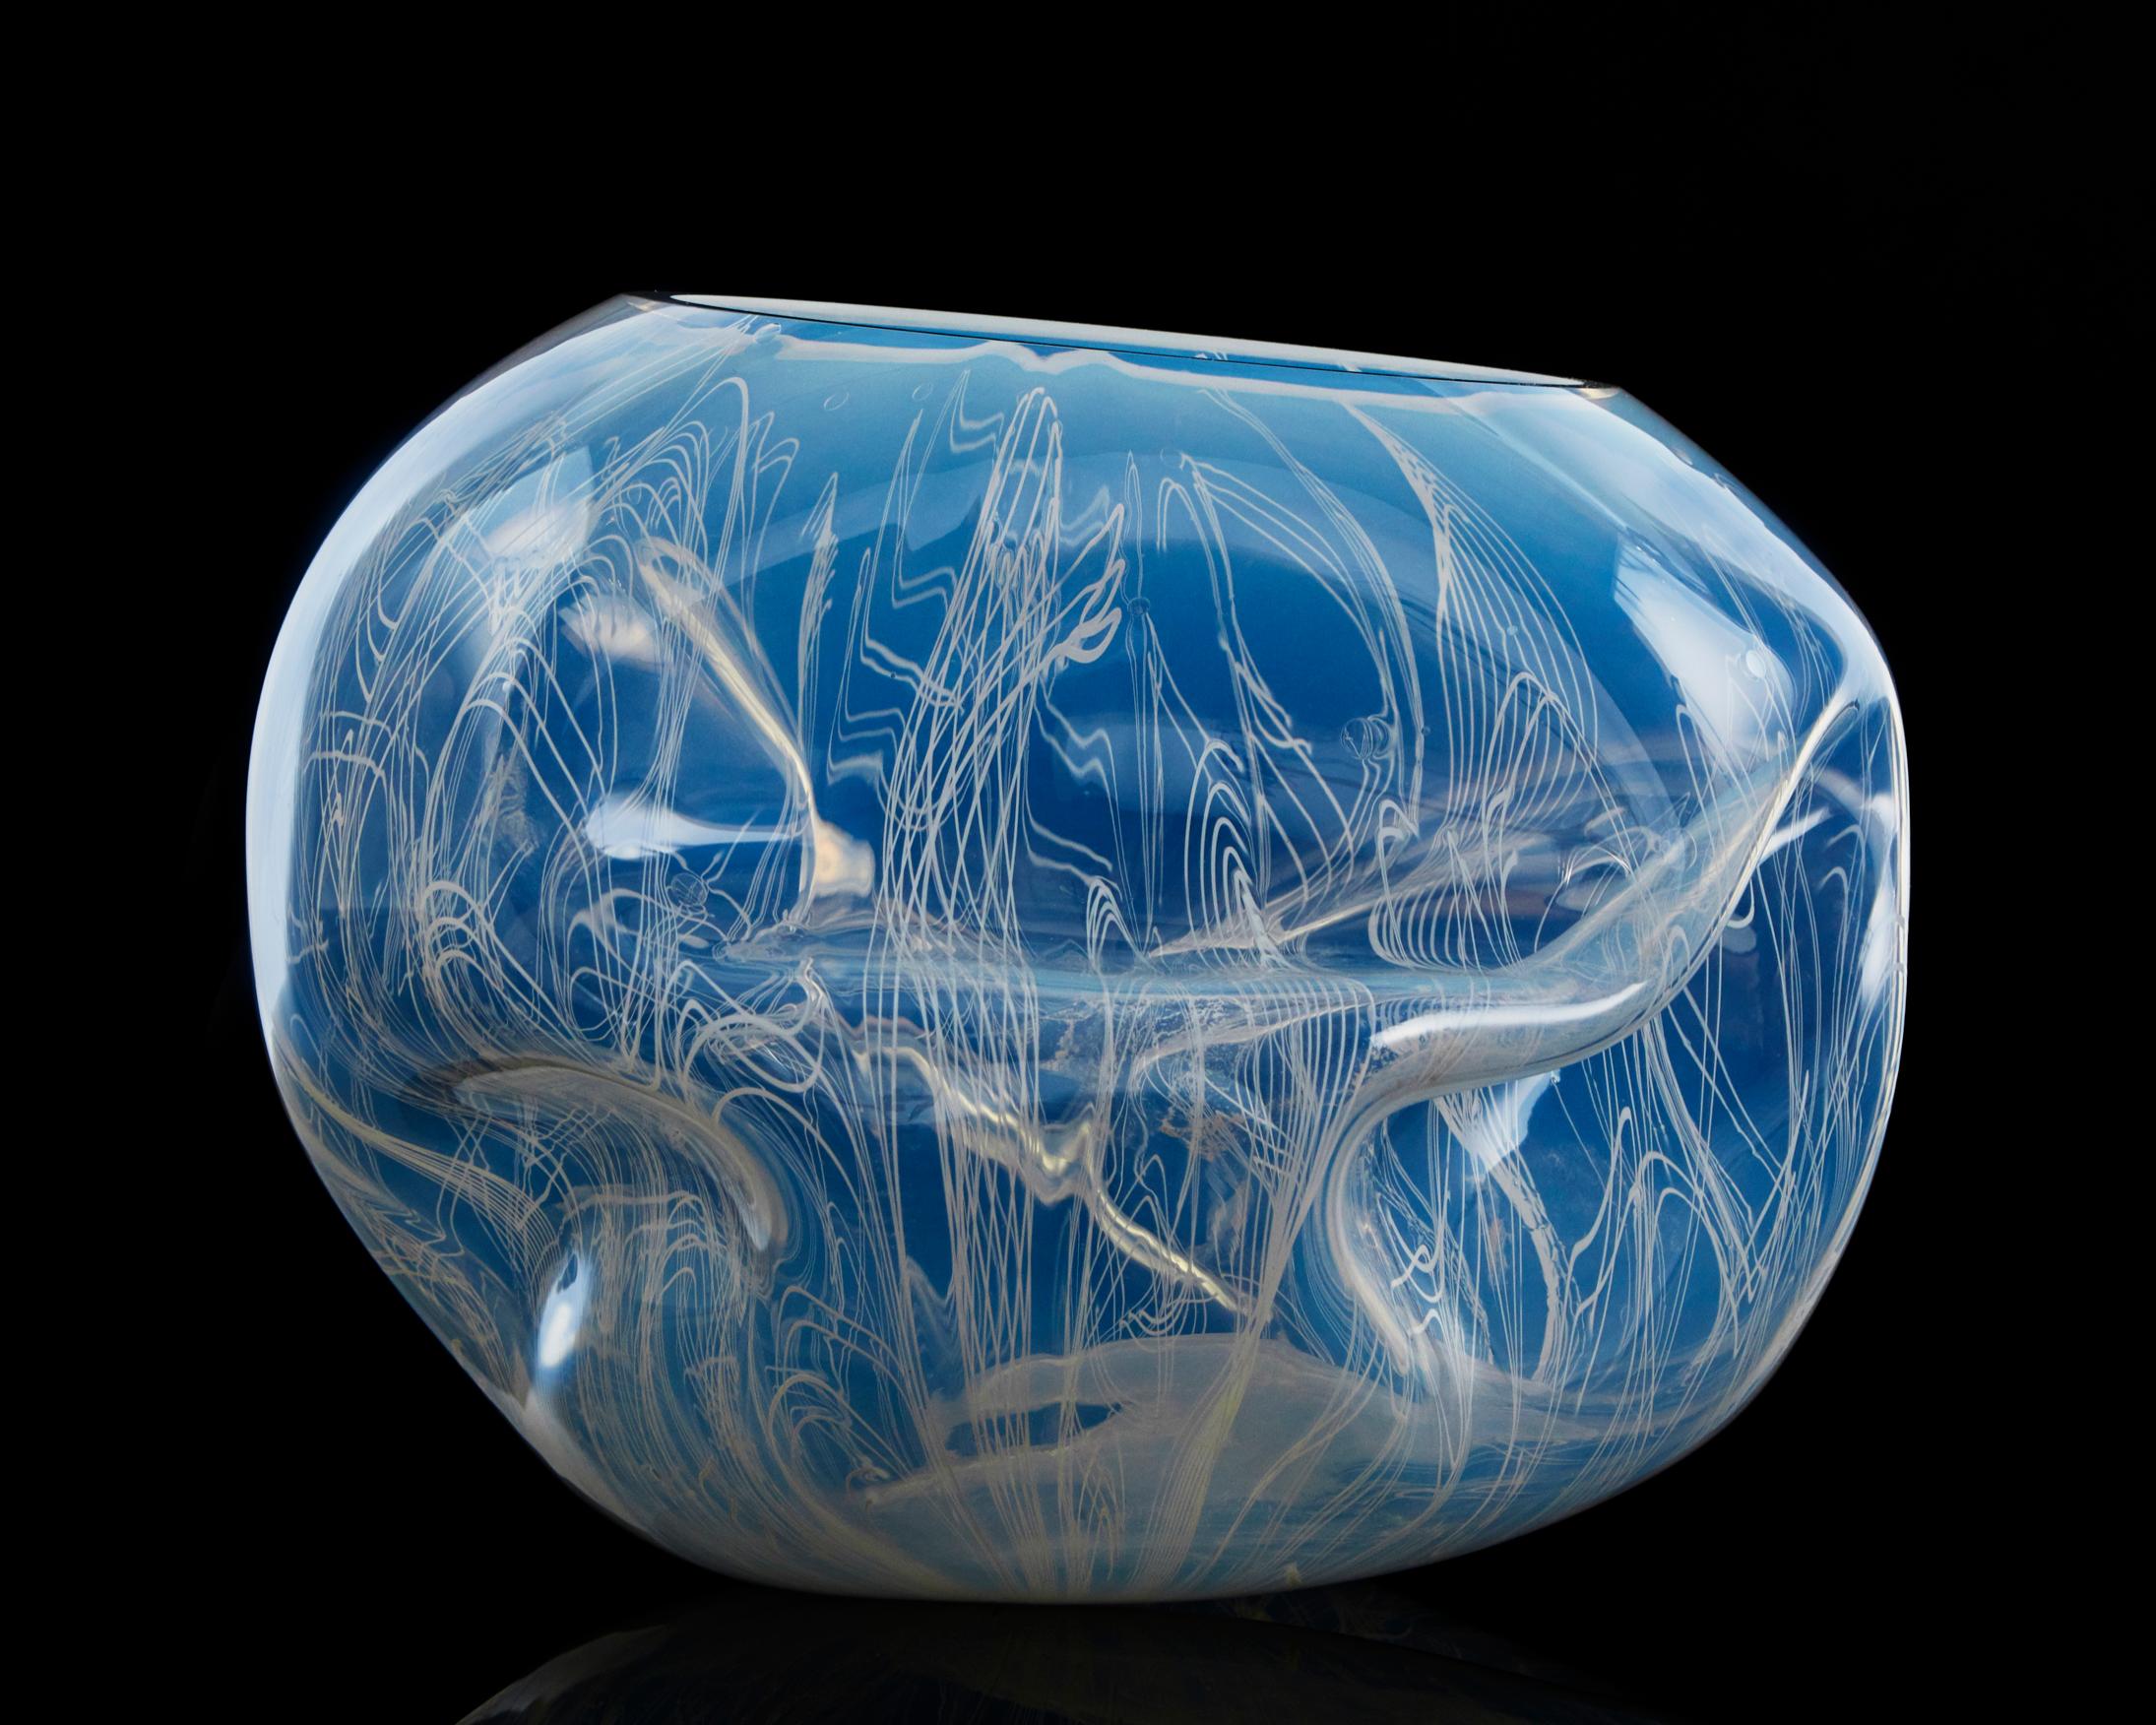 Unique crumpled sculptural vessel in hand blown filigree glass. Designed and made by Jeff Zimmerman and James Mongrain, USA, 2019.